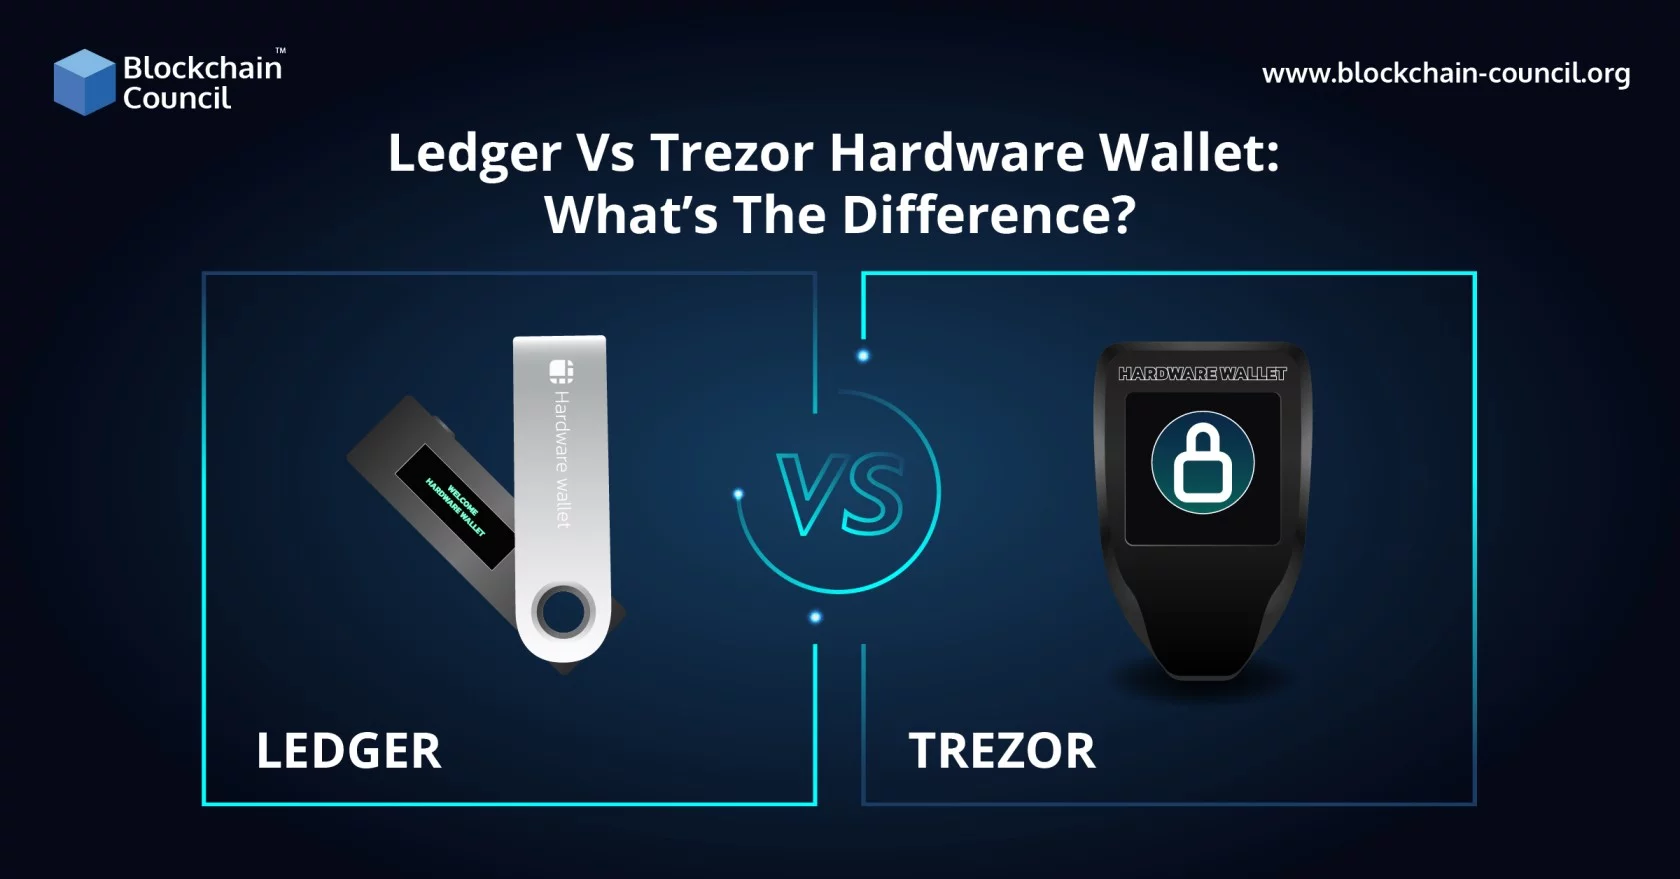 Ledger vs Trezor Hardware Wallet: What’s The Difference?